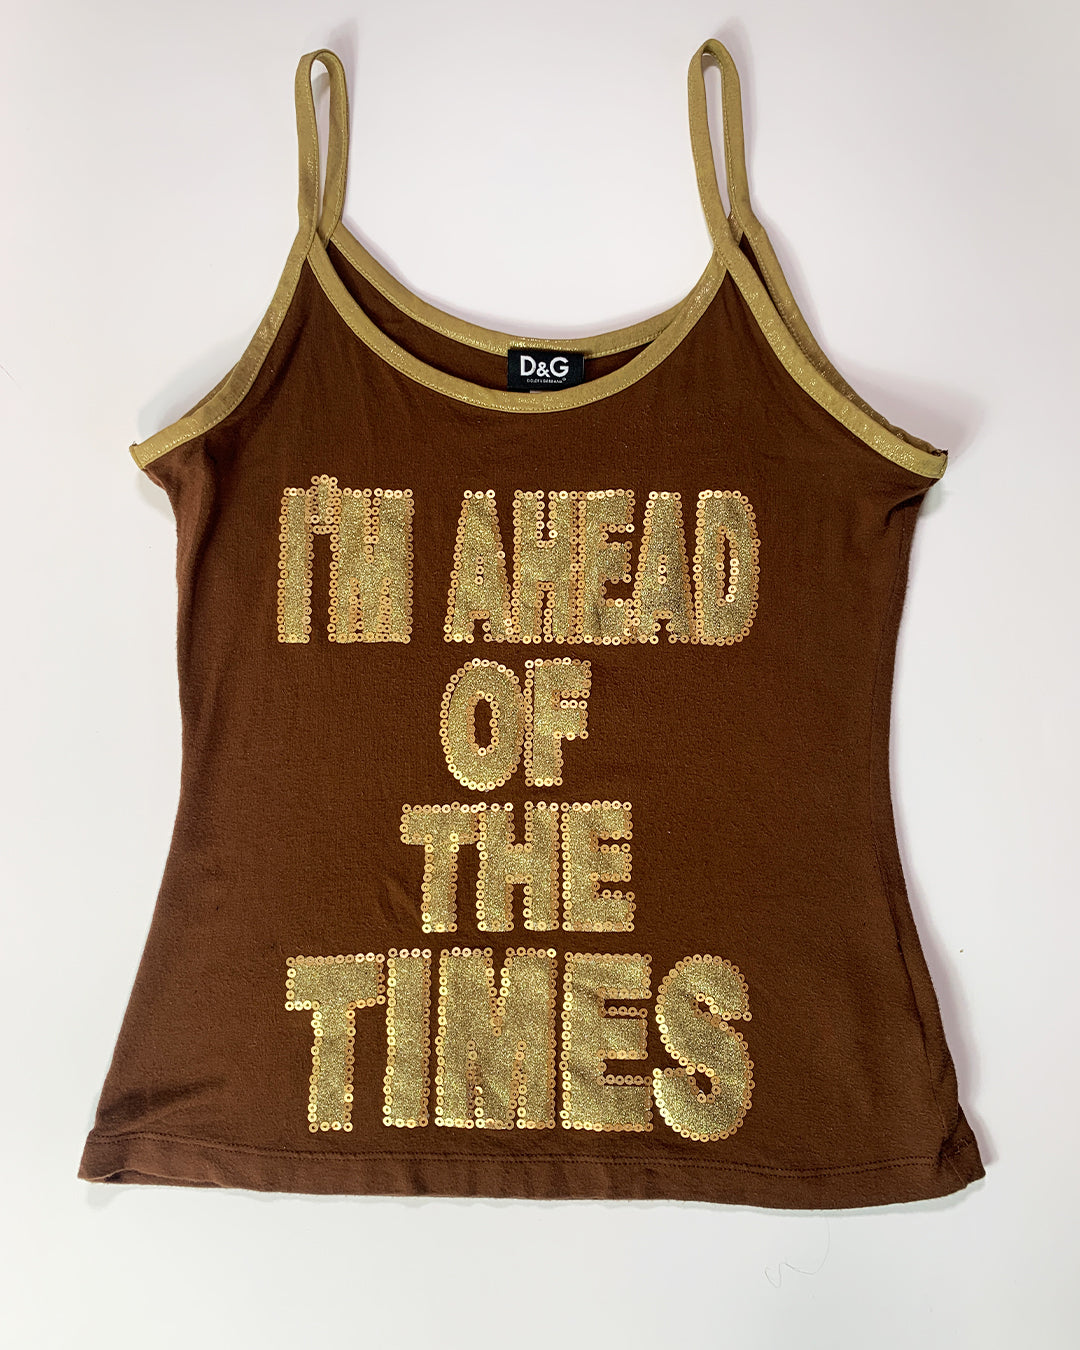 Dolce & Gabbana 'I'm Ahead of The Times' Top